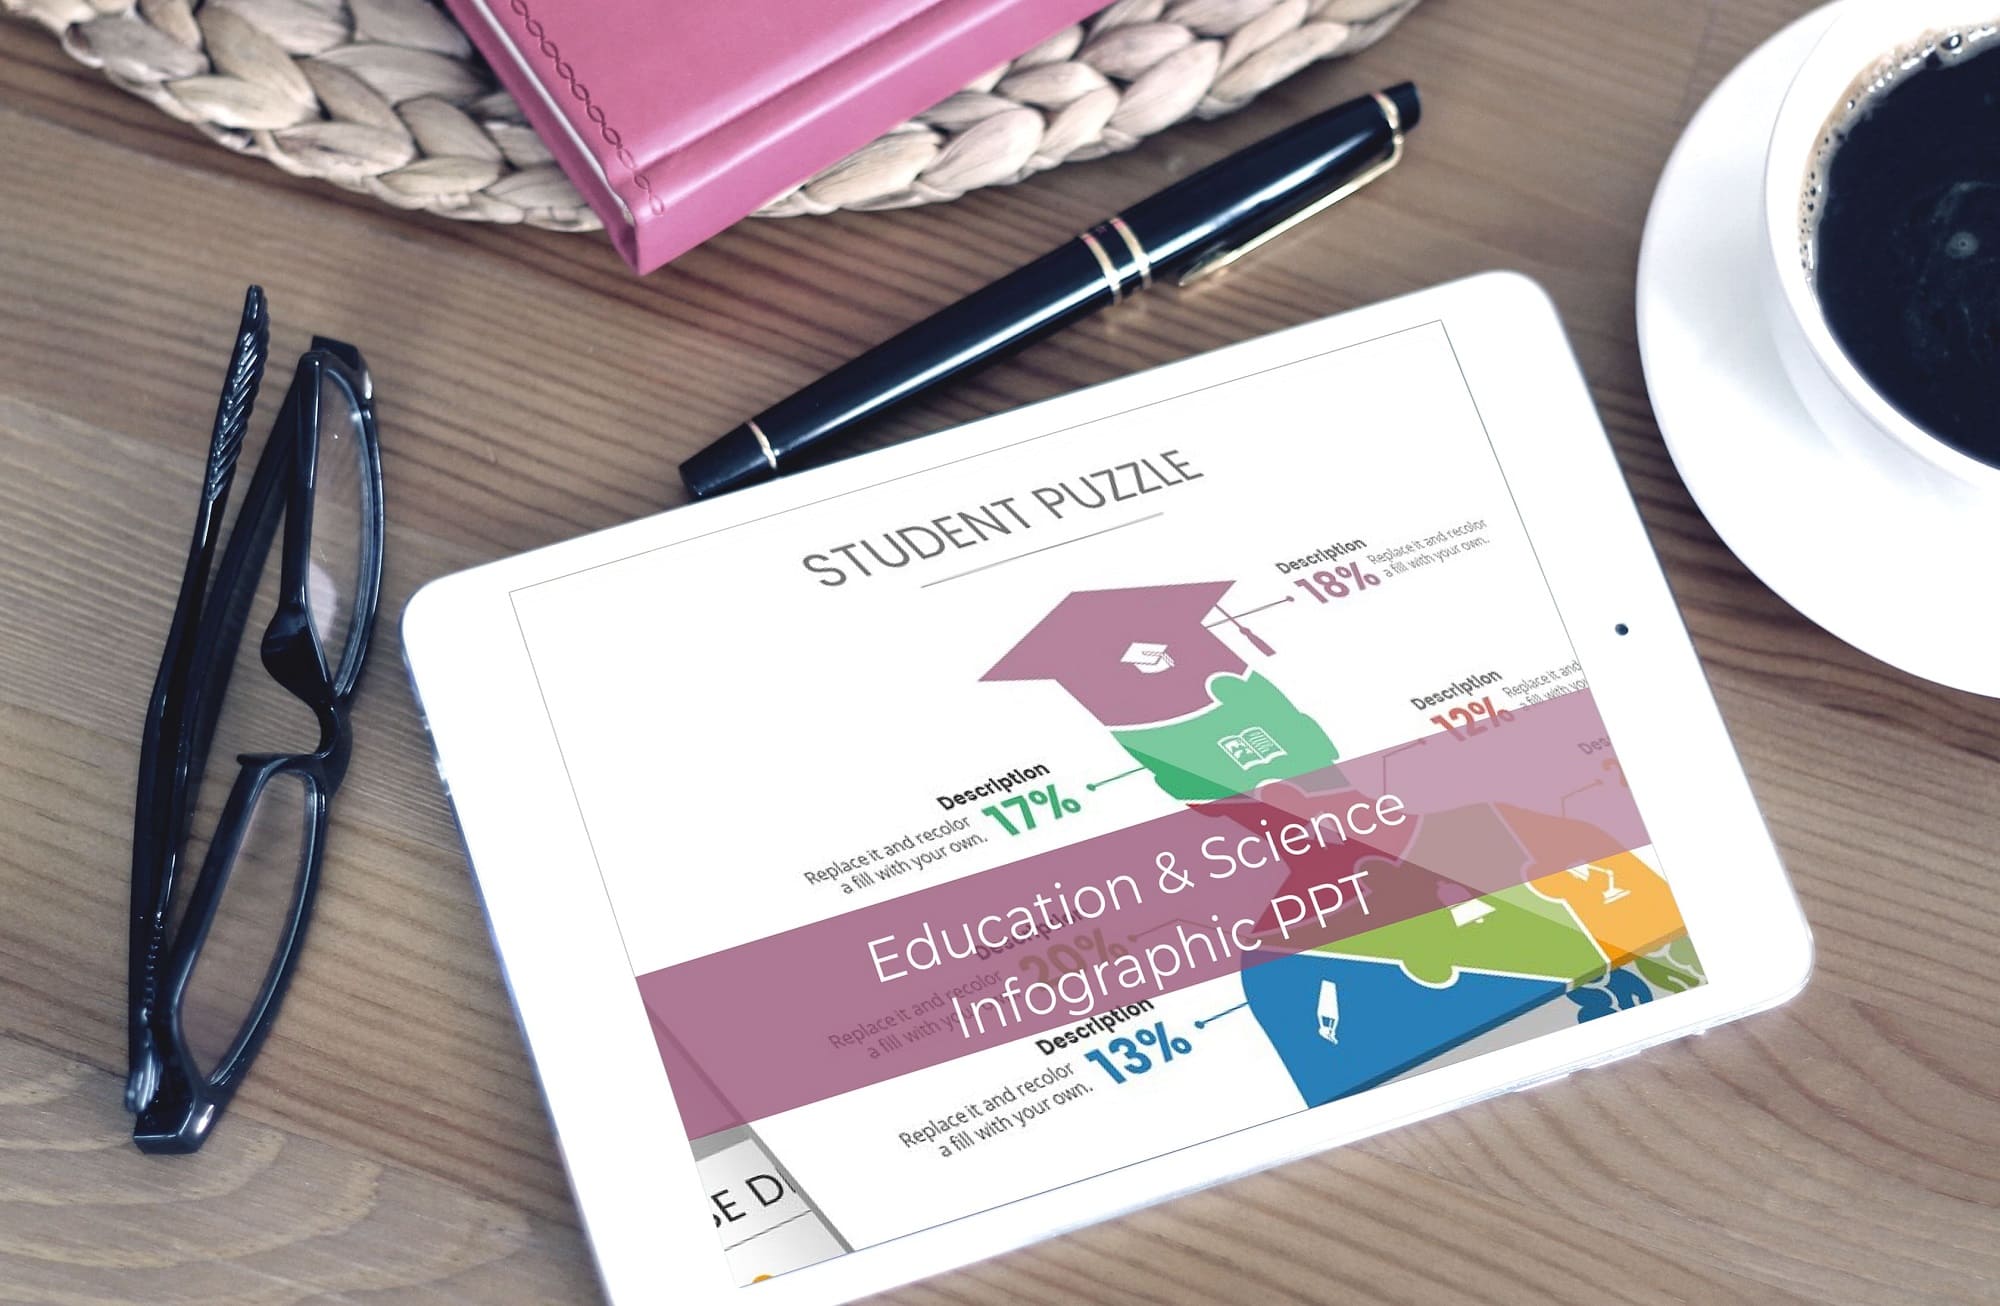 education science infographic ppt tablet mockup.